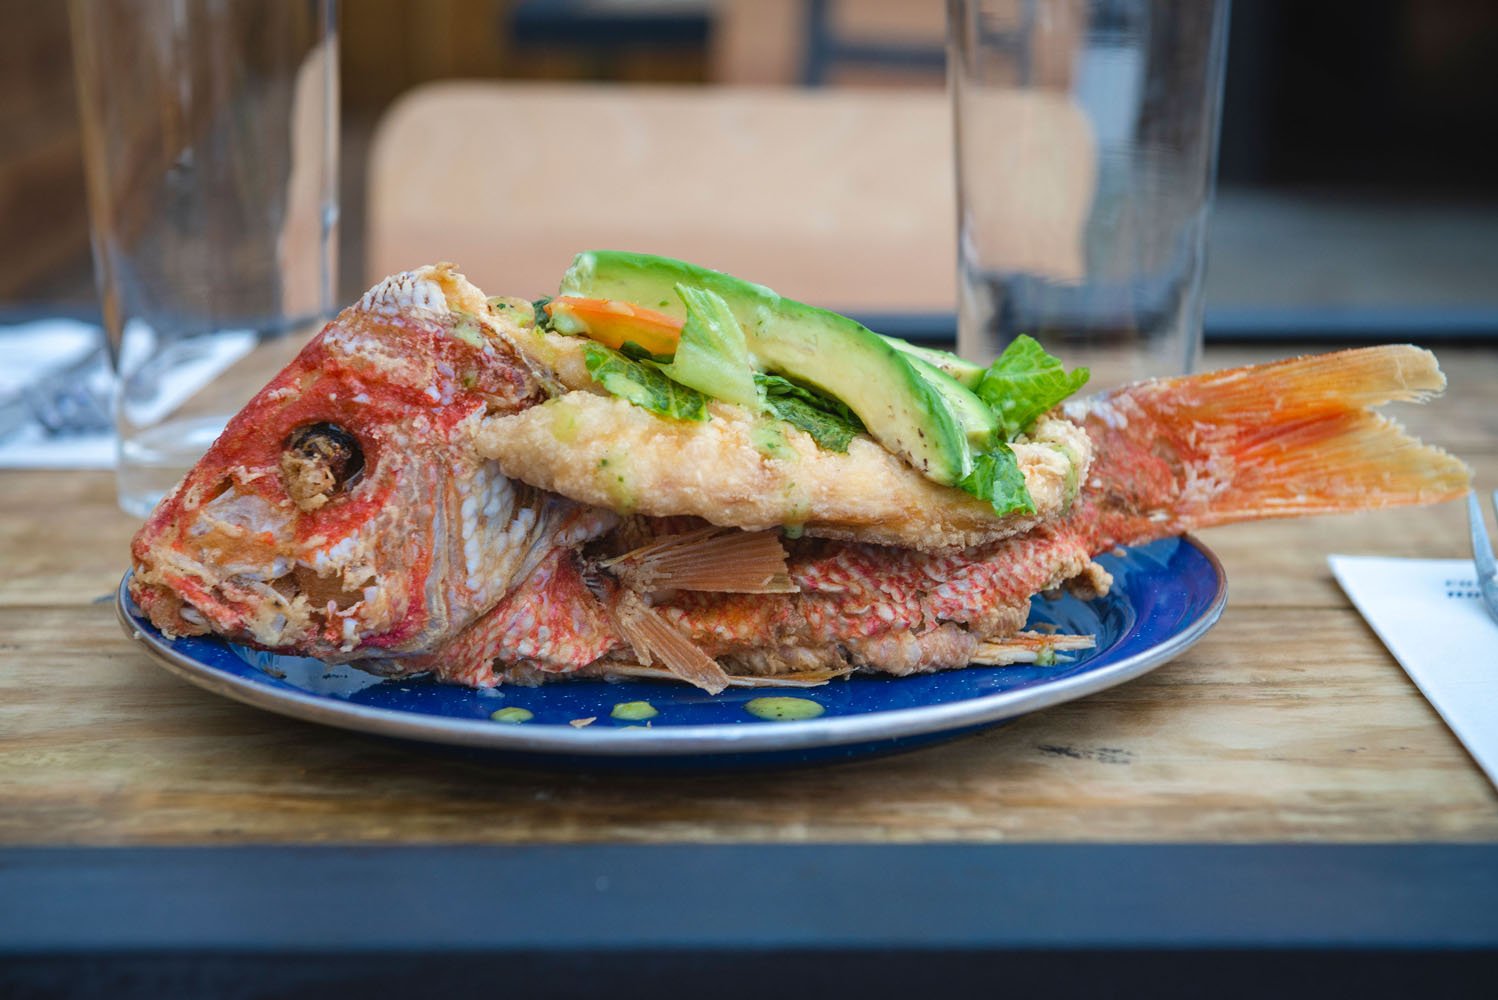 A plate with a whole red snapper, garnished with green vegetables, at a restaurant table, with a glass of water and background seating visible.